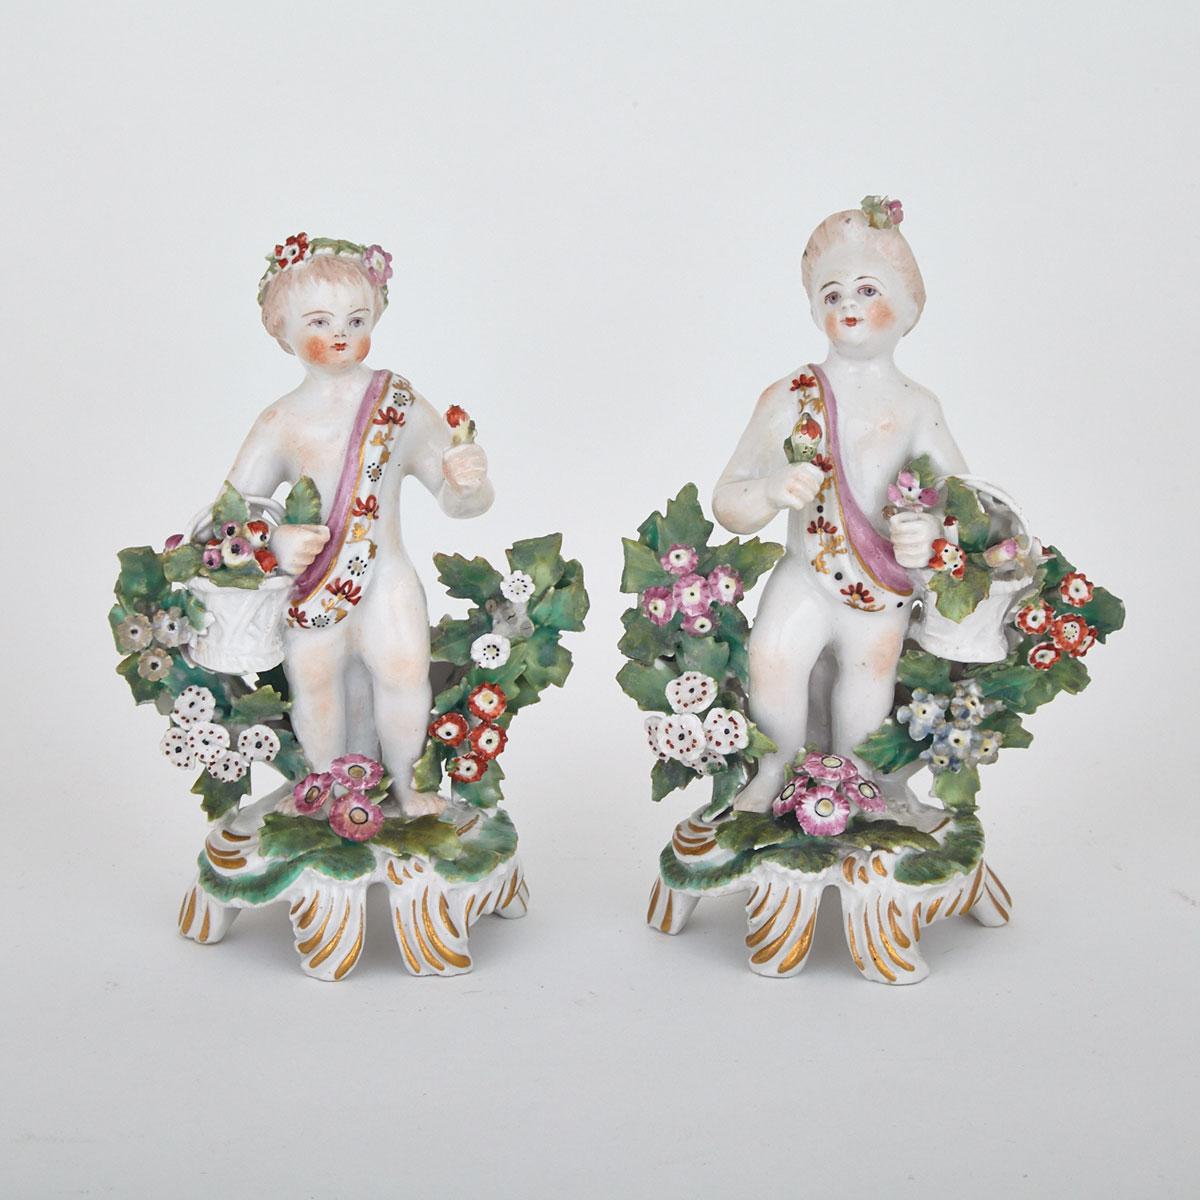 Pair of Bow Figures of Putti, c.1765-70